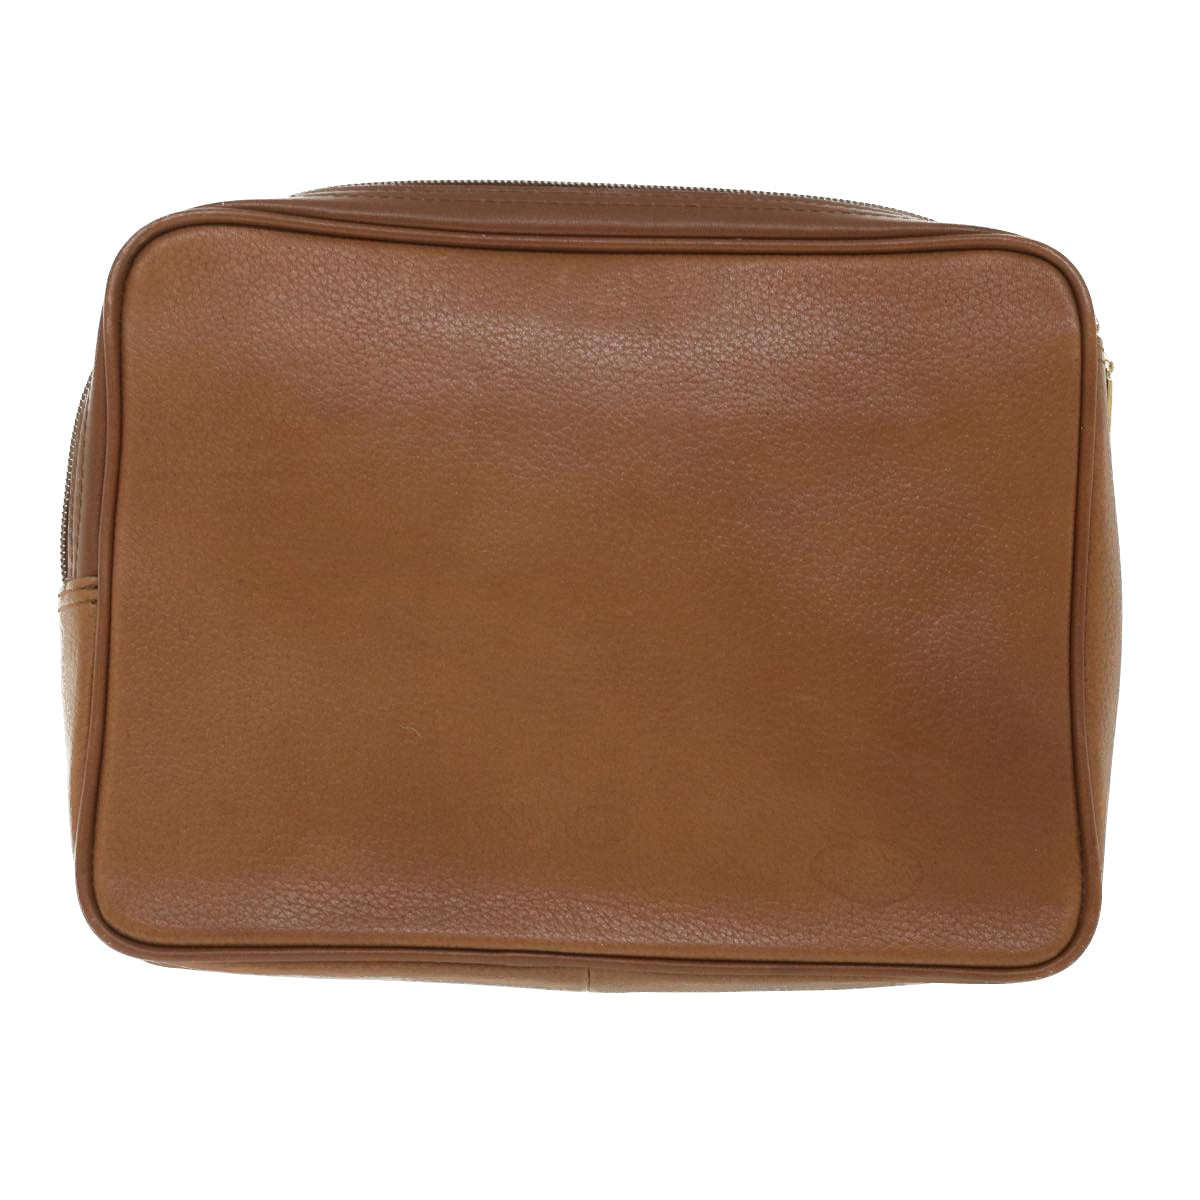 Burberrys Clutch Bag Leather Brown Auth bs8982 - 0